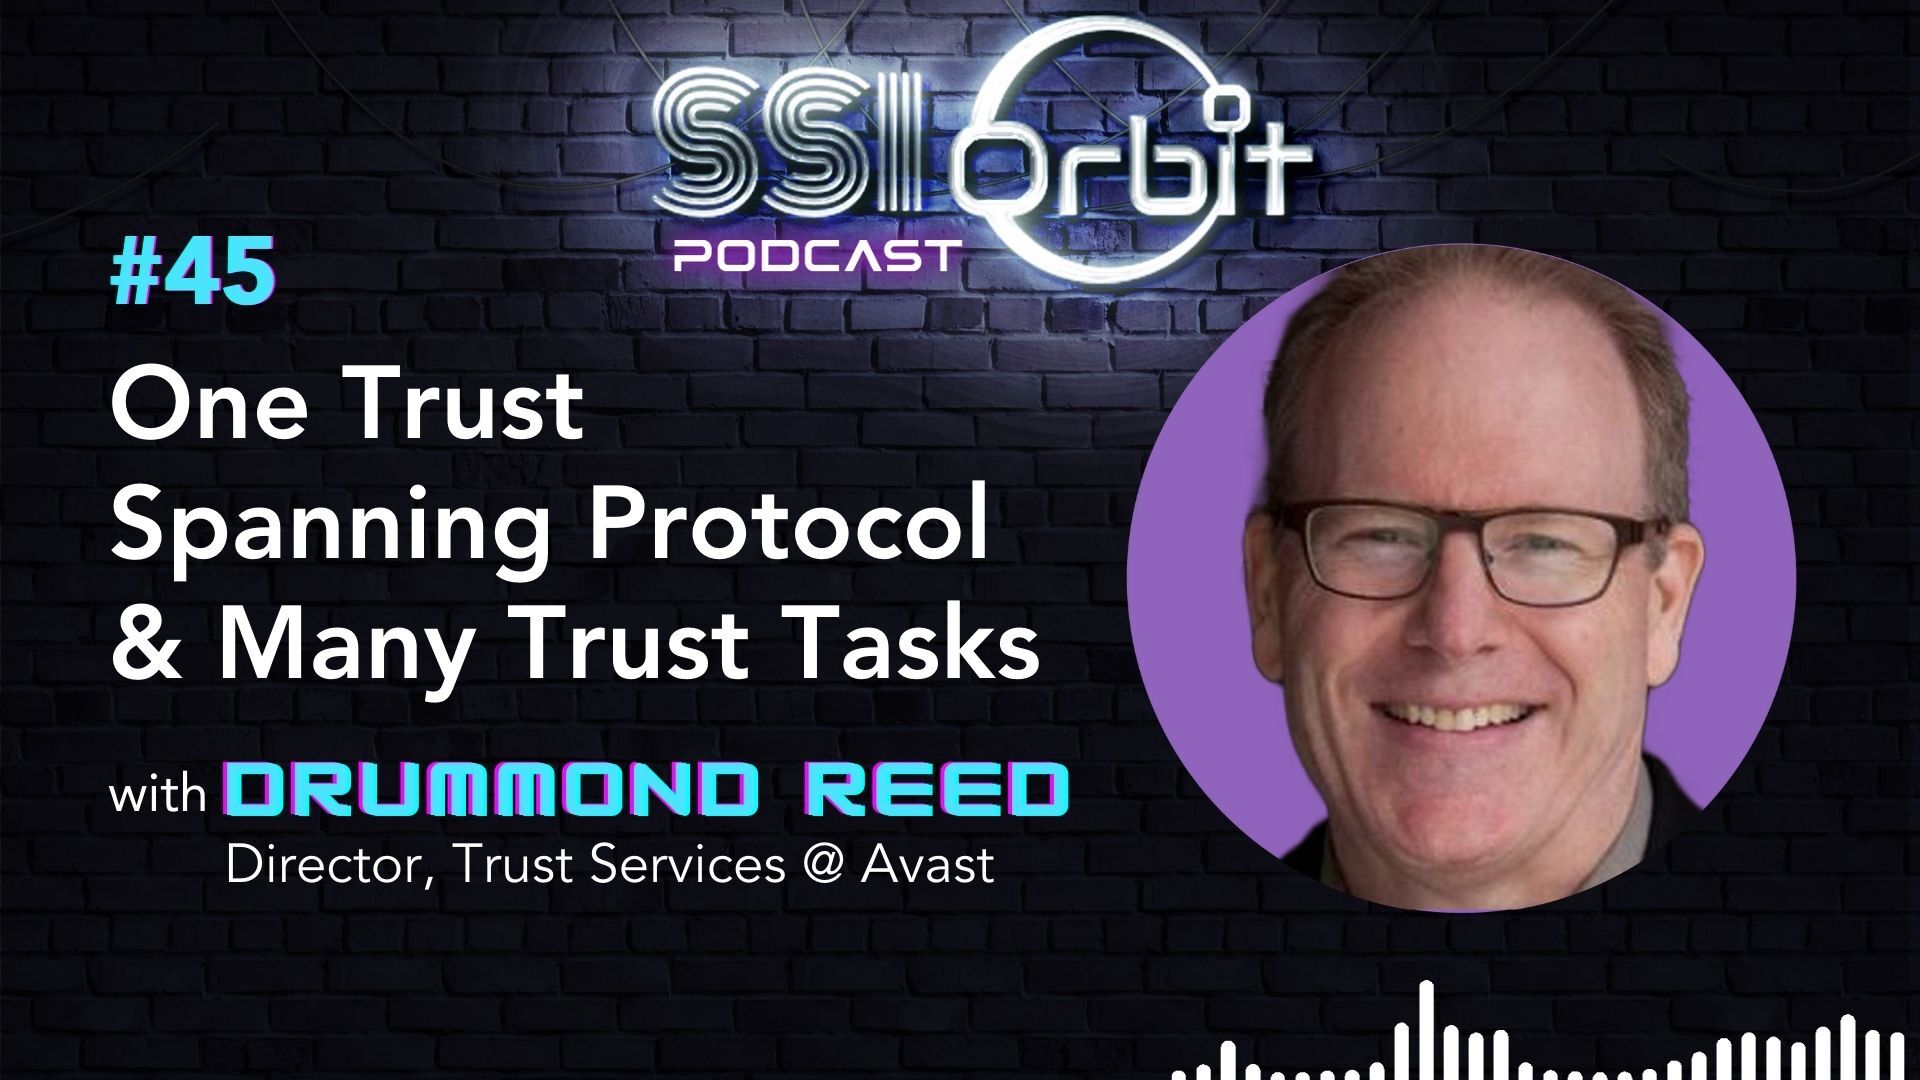 One Trust Spanning Protocol & Many Trust Tasks (with Drummond Reed)